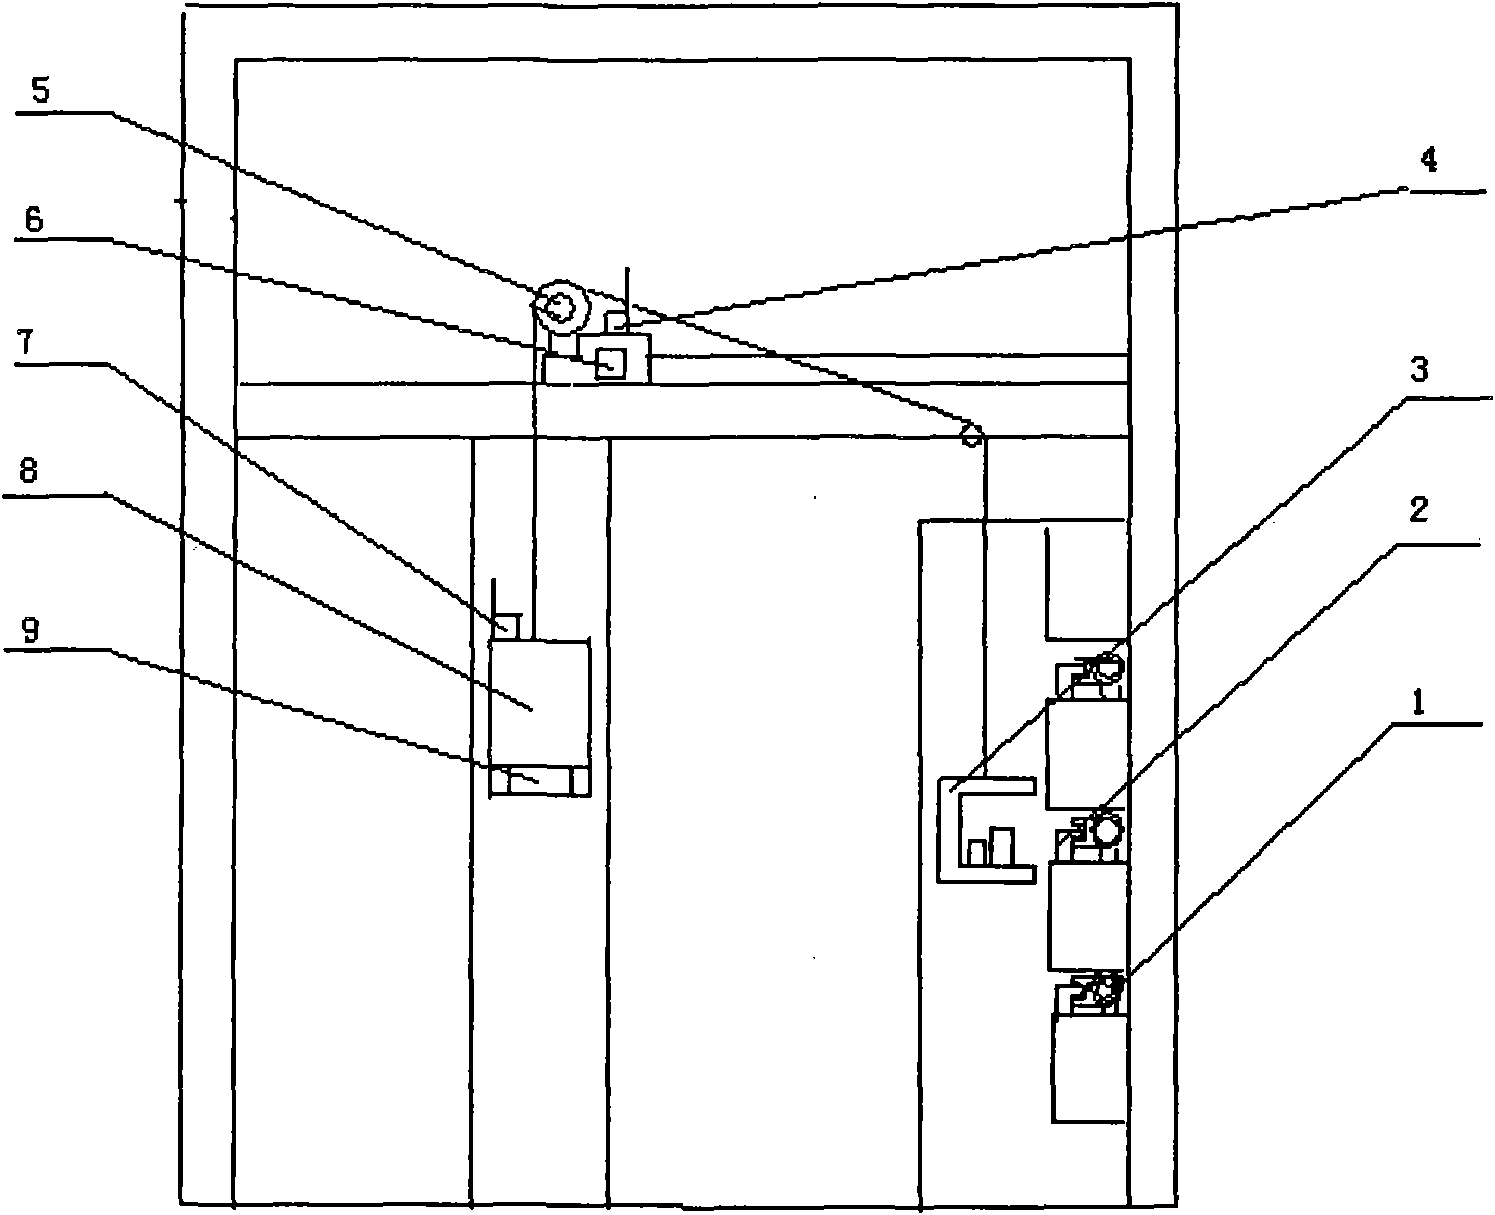 Elevator of variable counterweight